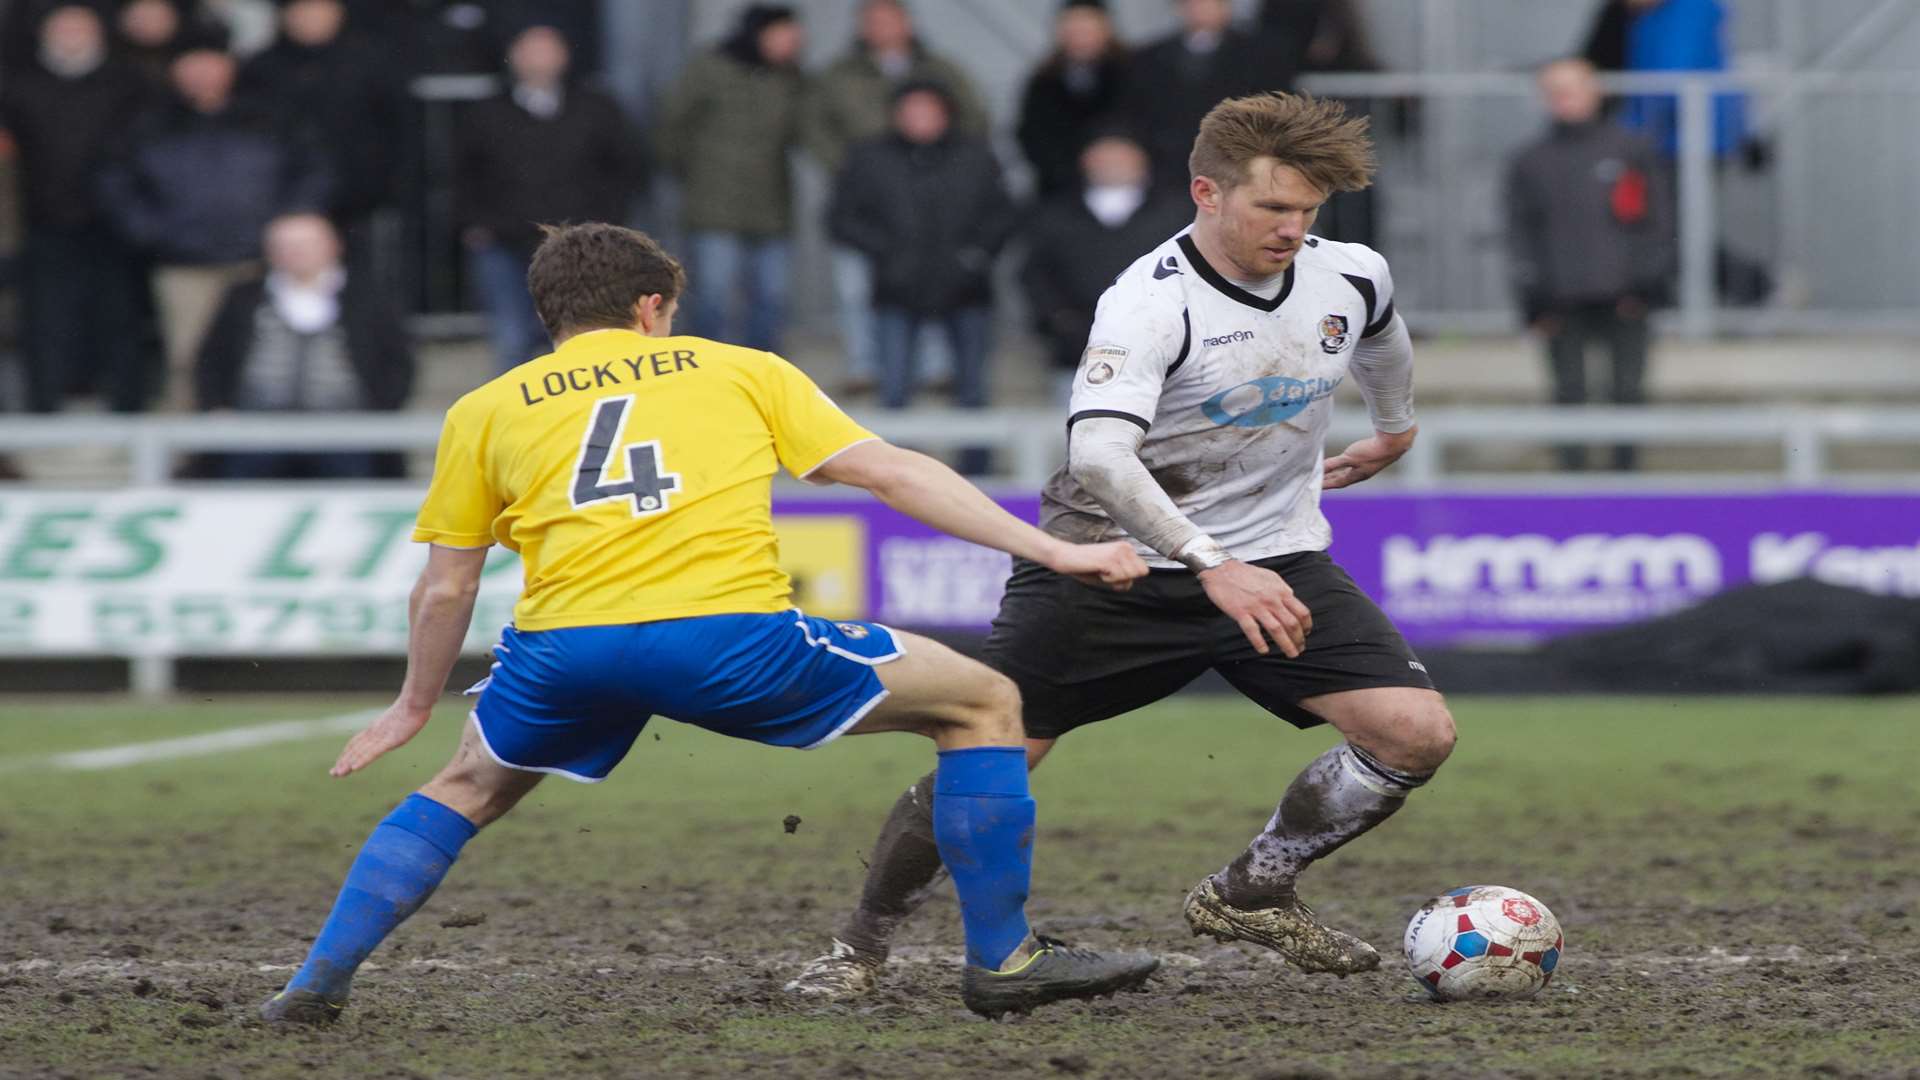 Conditions played a big part when Dartford took on Bristol Rovers Picture: Andy Payton